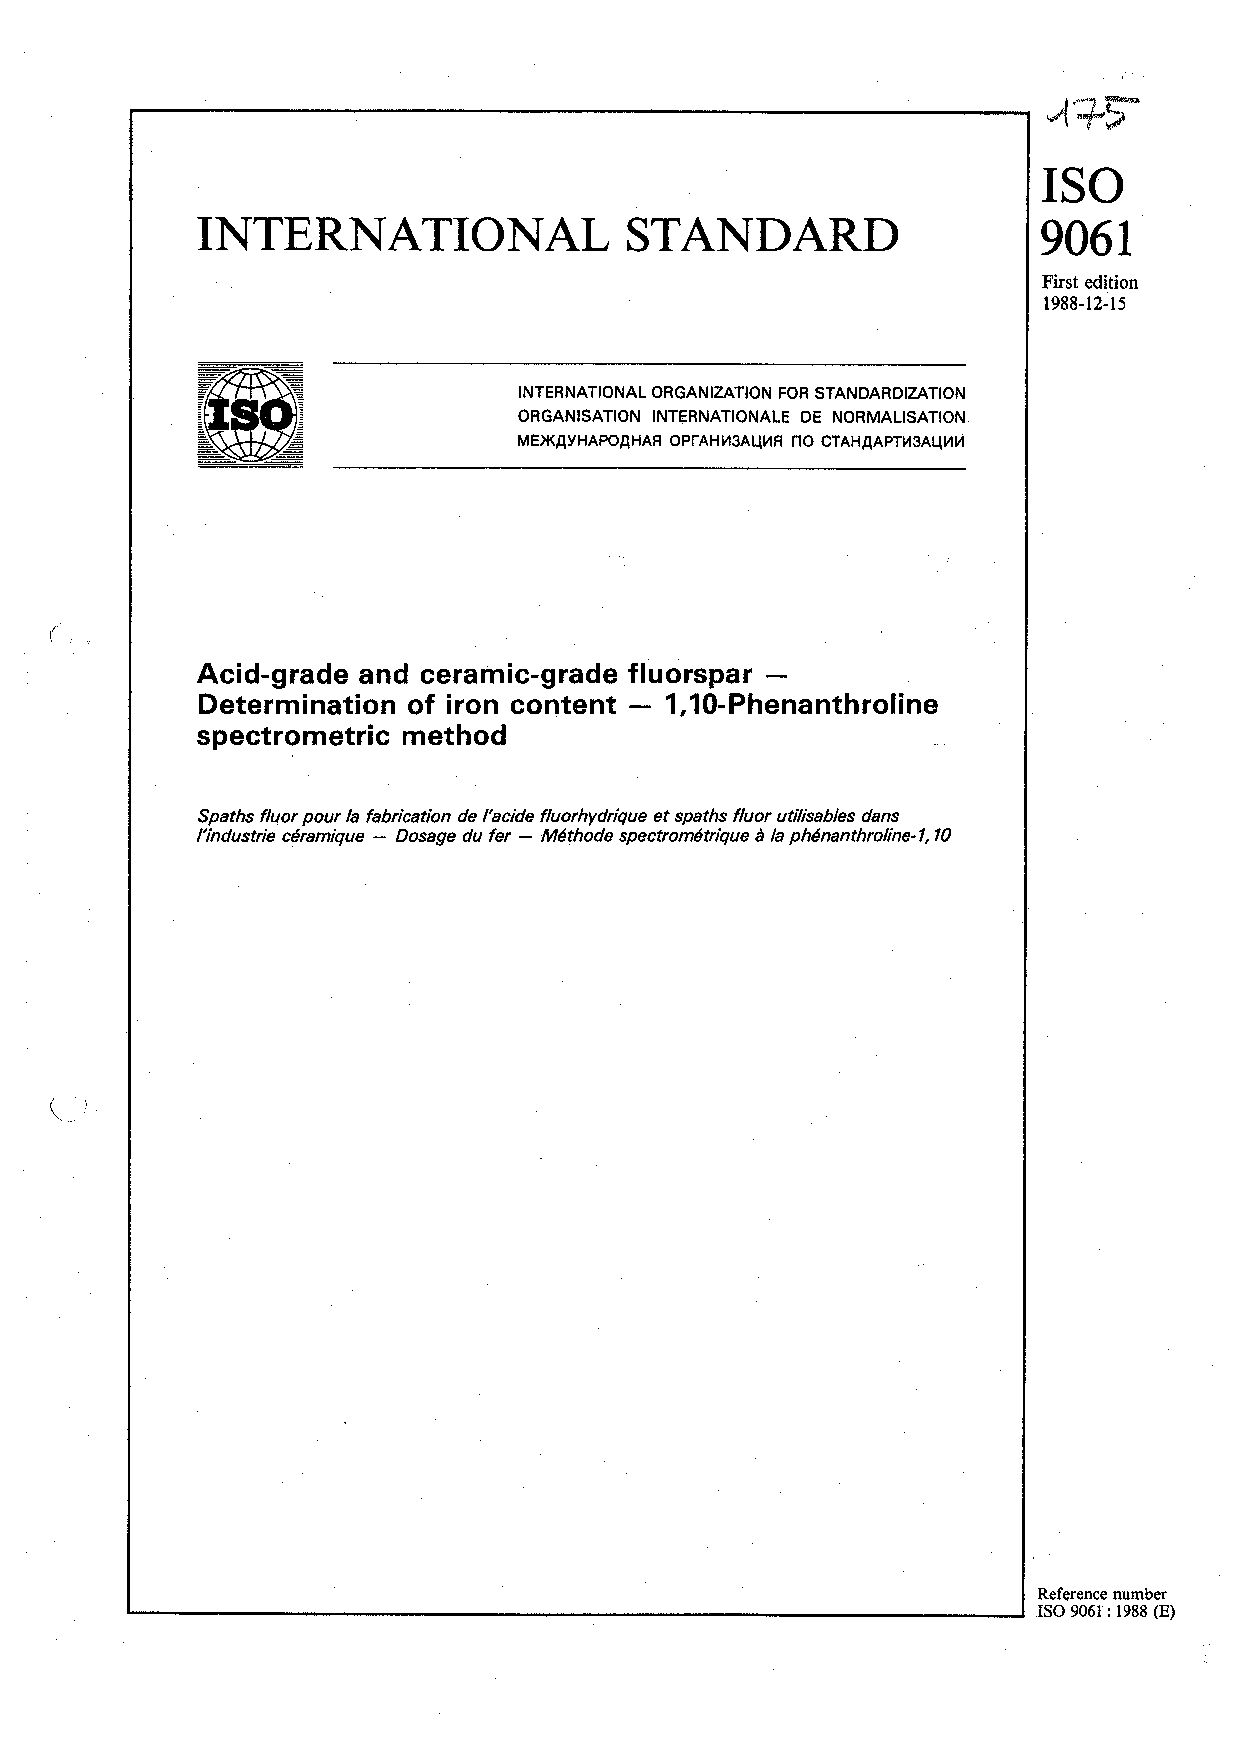 ISO 9061:1988